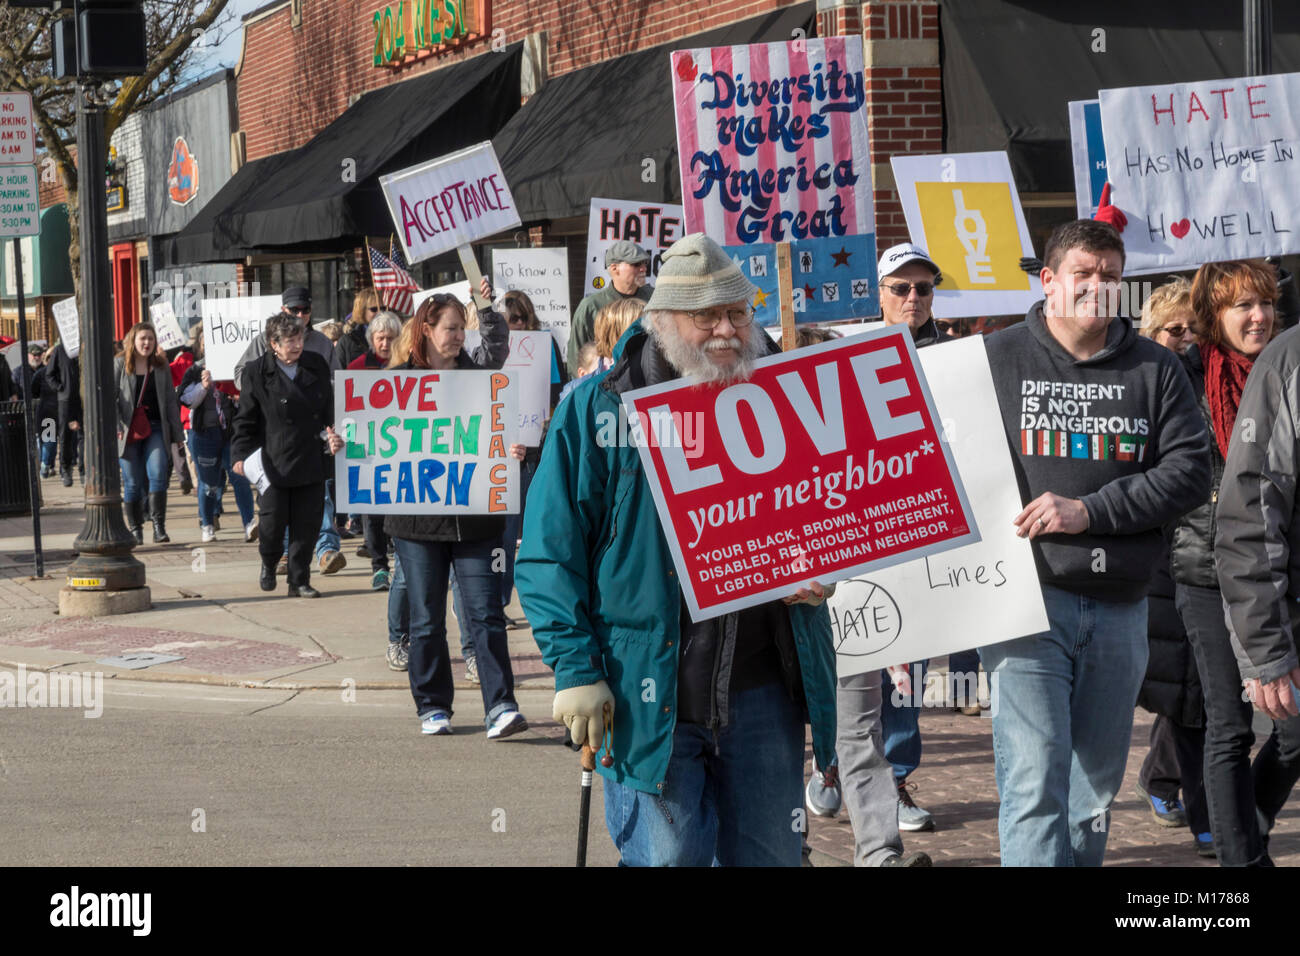 Howell, Michigan USA - 27 January 2018 - Residents organized a 'March Against Fear' to protest white nationalist literature distributed recently in their community. The town, which is 95% white, has long had a reputation of tolerating the Ku Klux Klan and other hate groups. Credit: Jim West/Alamy Live News Stock Photo